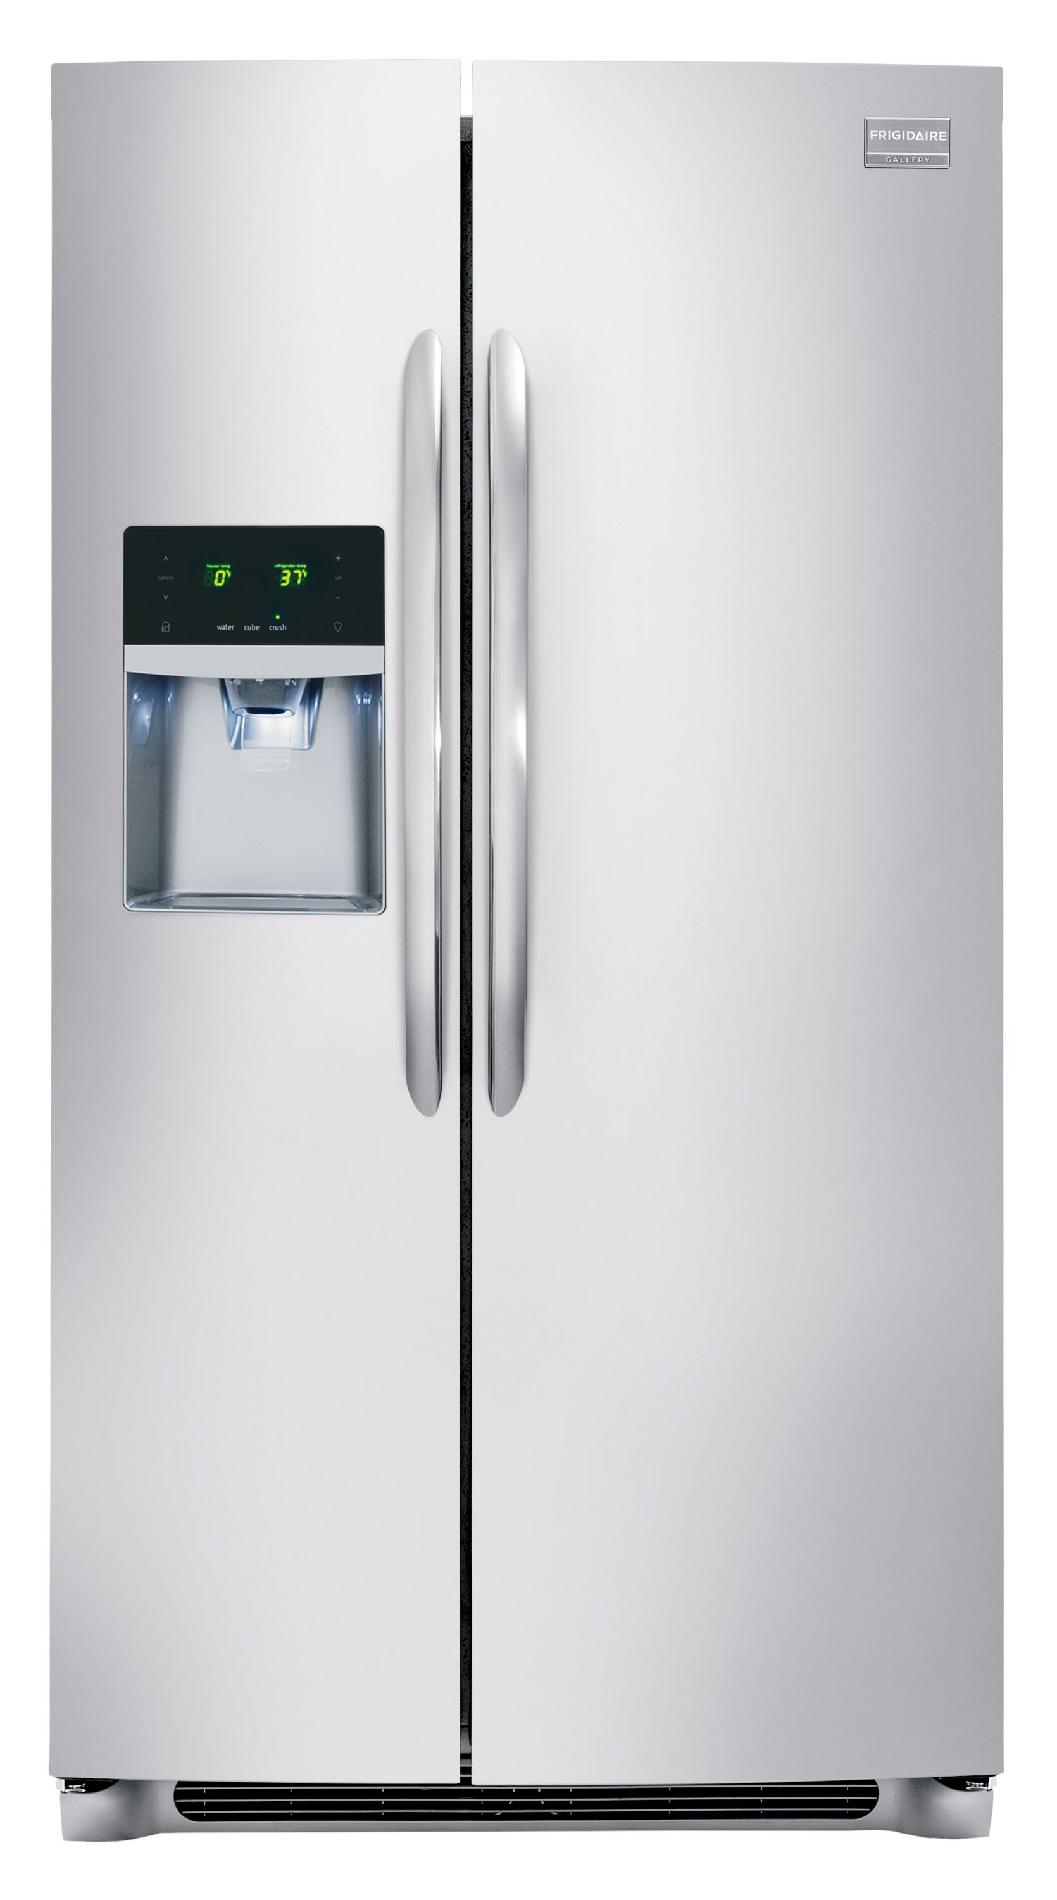 UPC 012505636455 product image for 22.6 cu. ft. Side-by-Side Refrigerator - Stainless Steel | upcitemdb.com